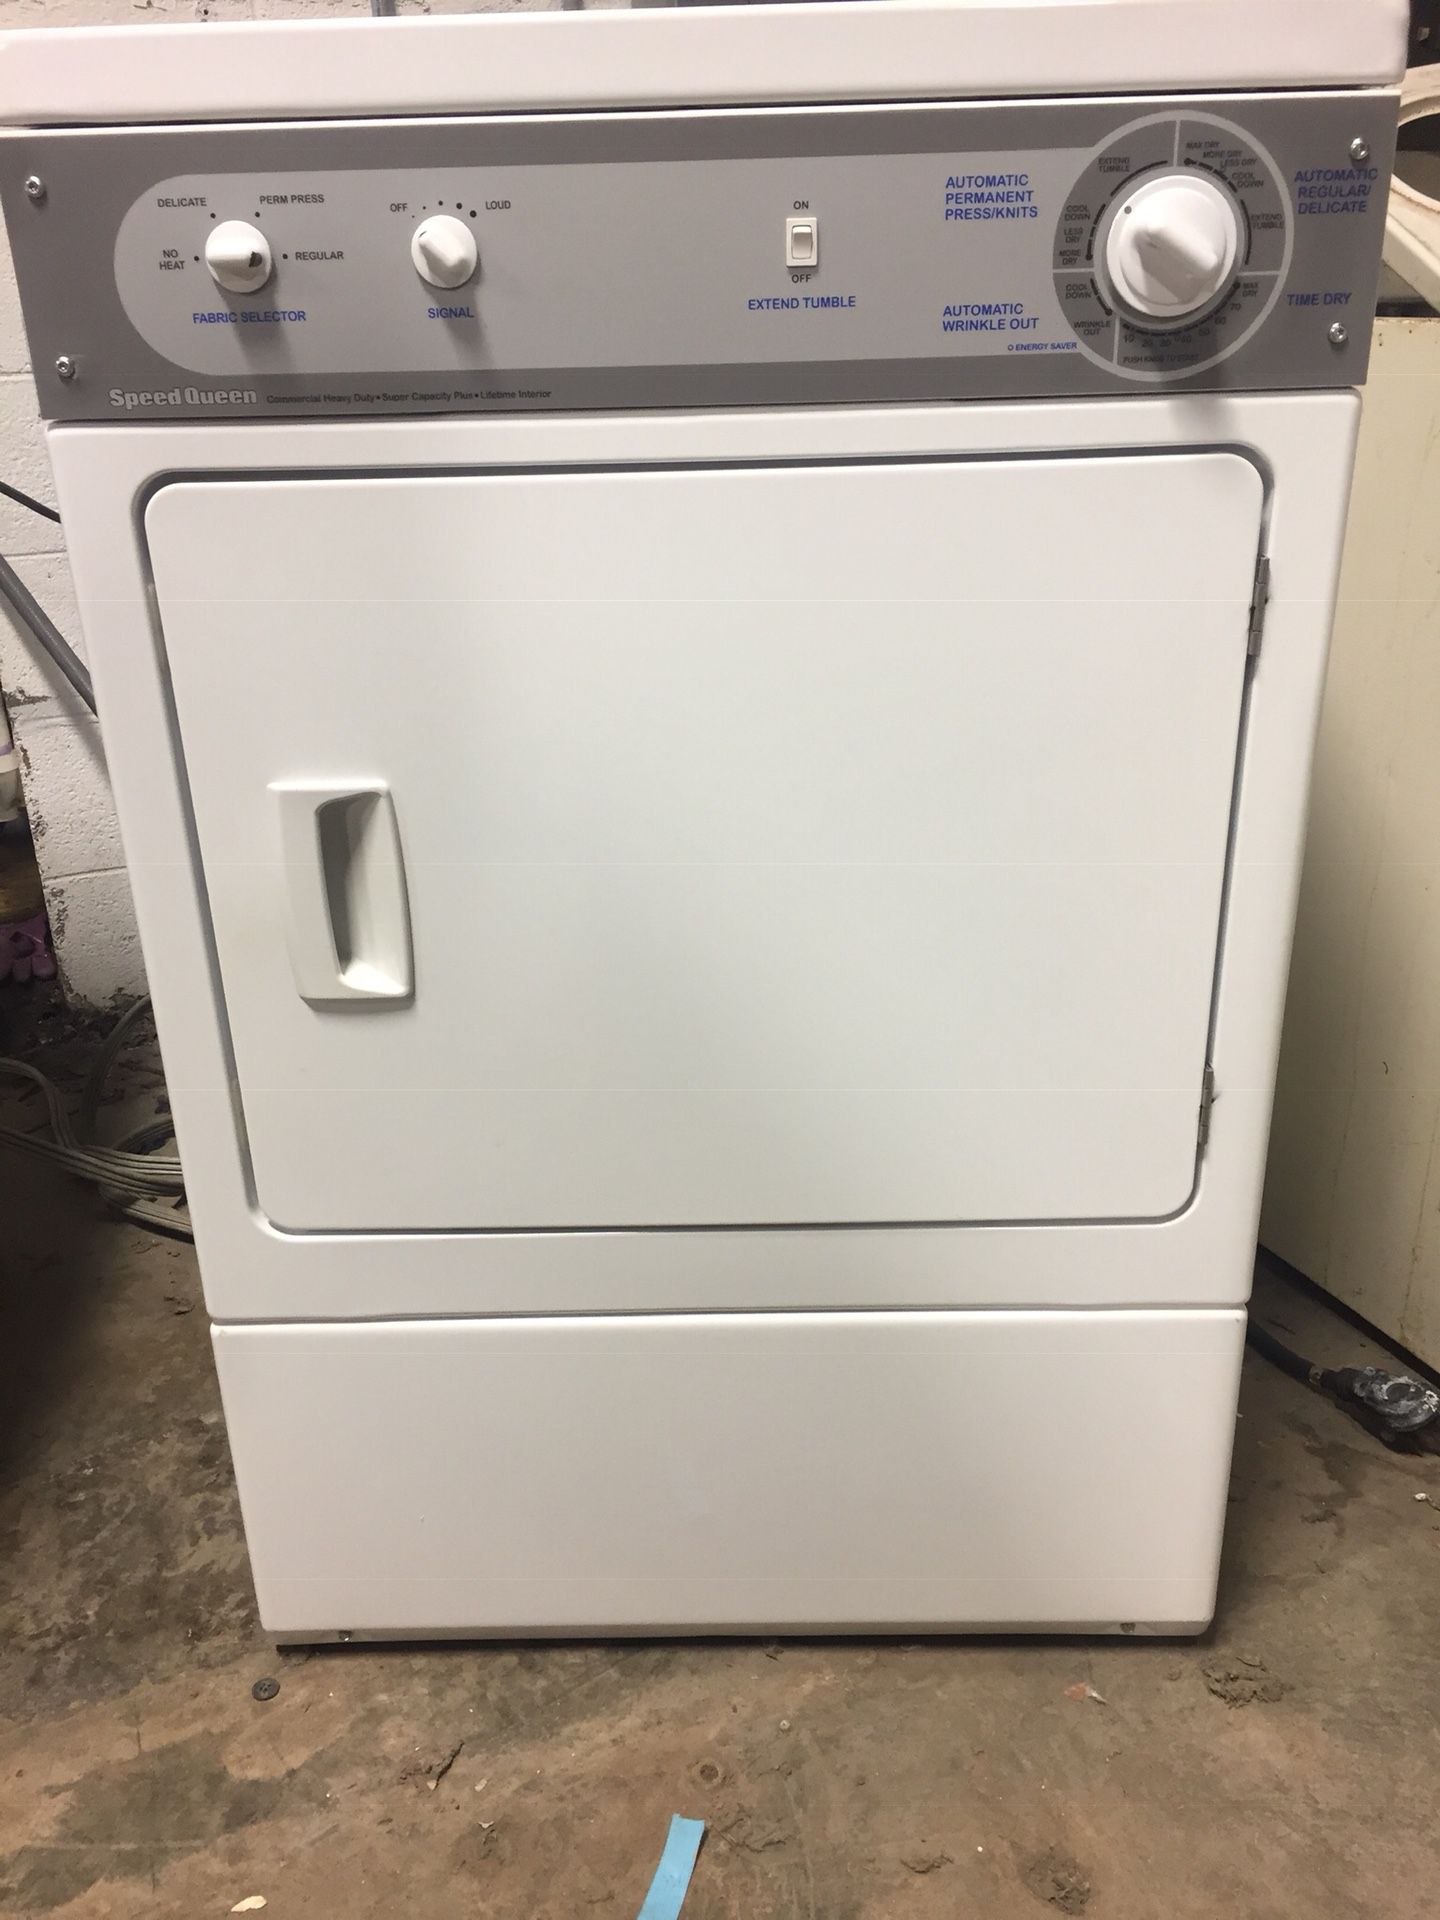 USED SPEED QUEEN COMMERCIAL HEAVY DUTY DRYER ELECTRIC SUPER CAPACITY PLUS COMES WITH 60 DAY WARRANTY